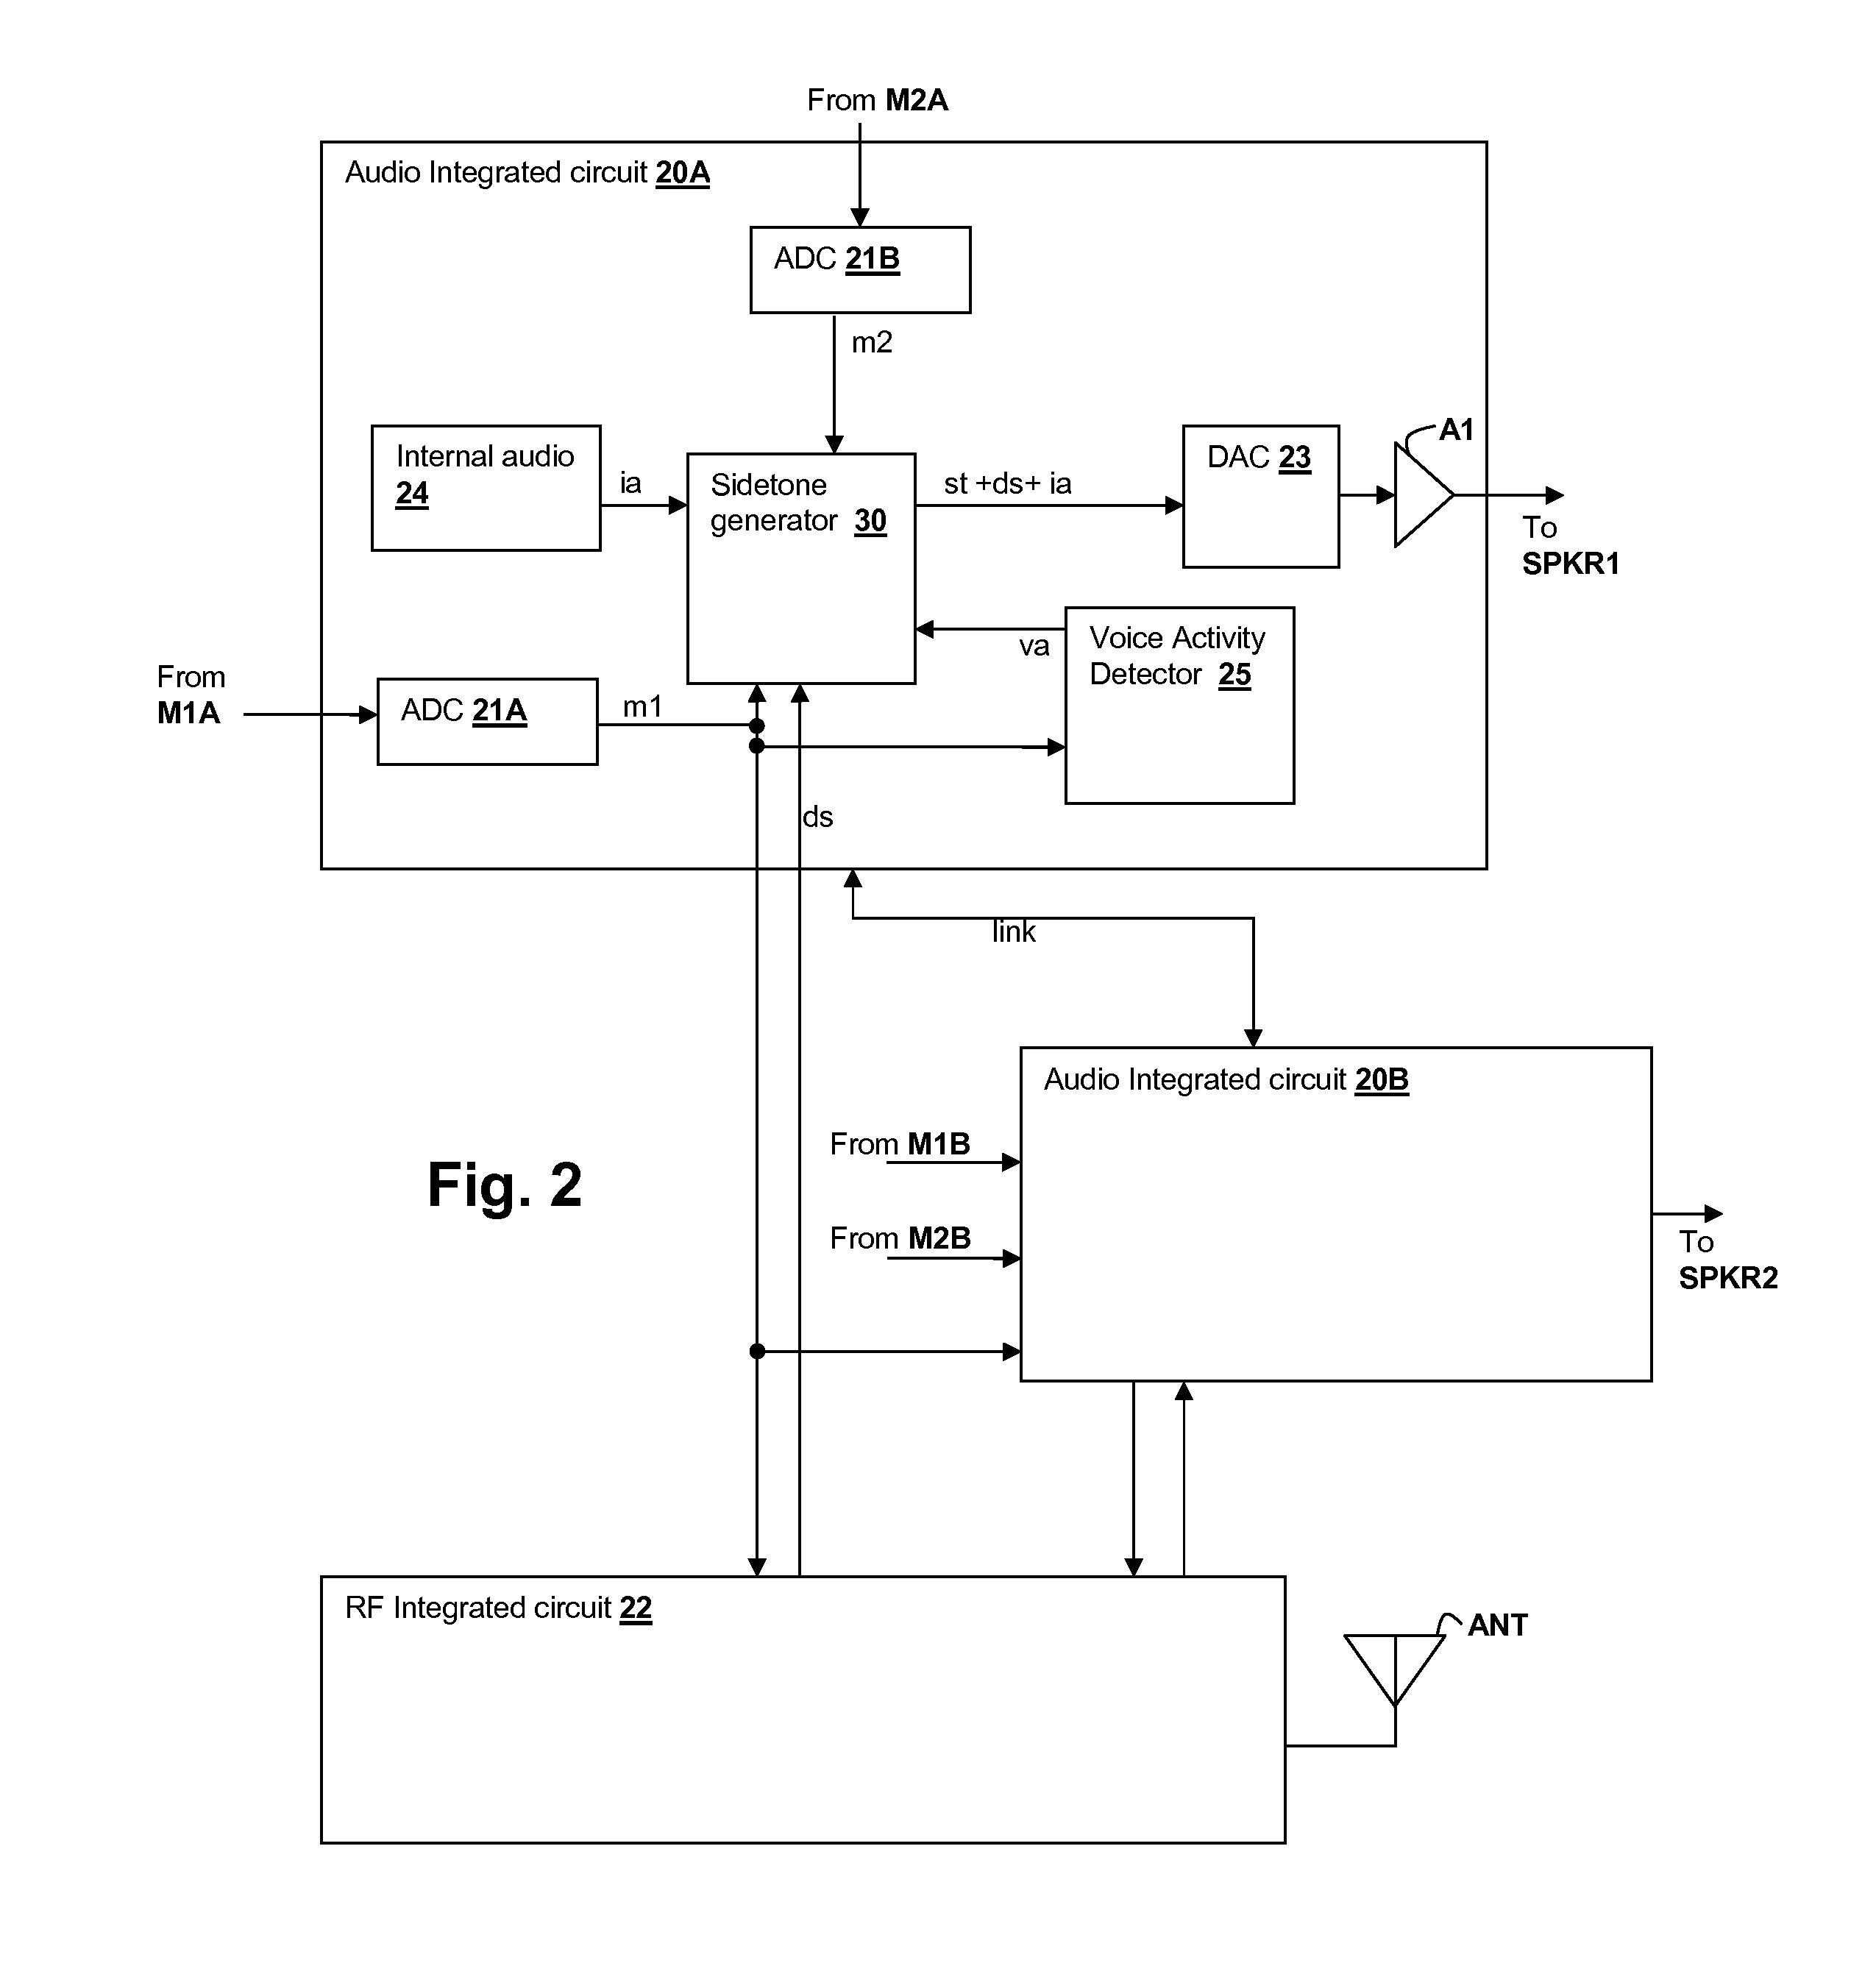 Frequency-dependent sidetone calibration